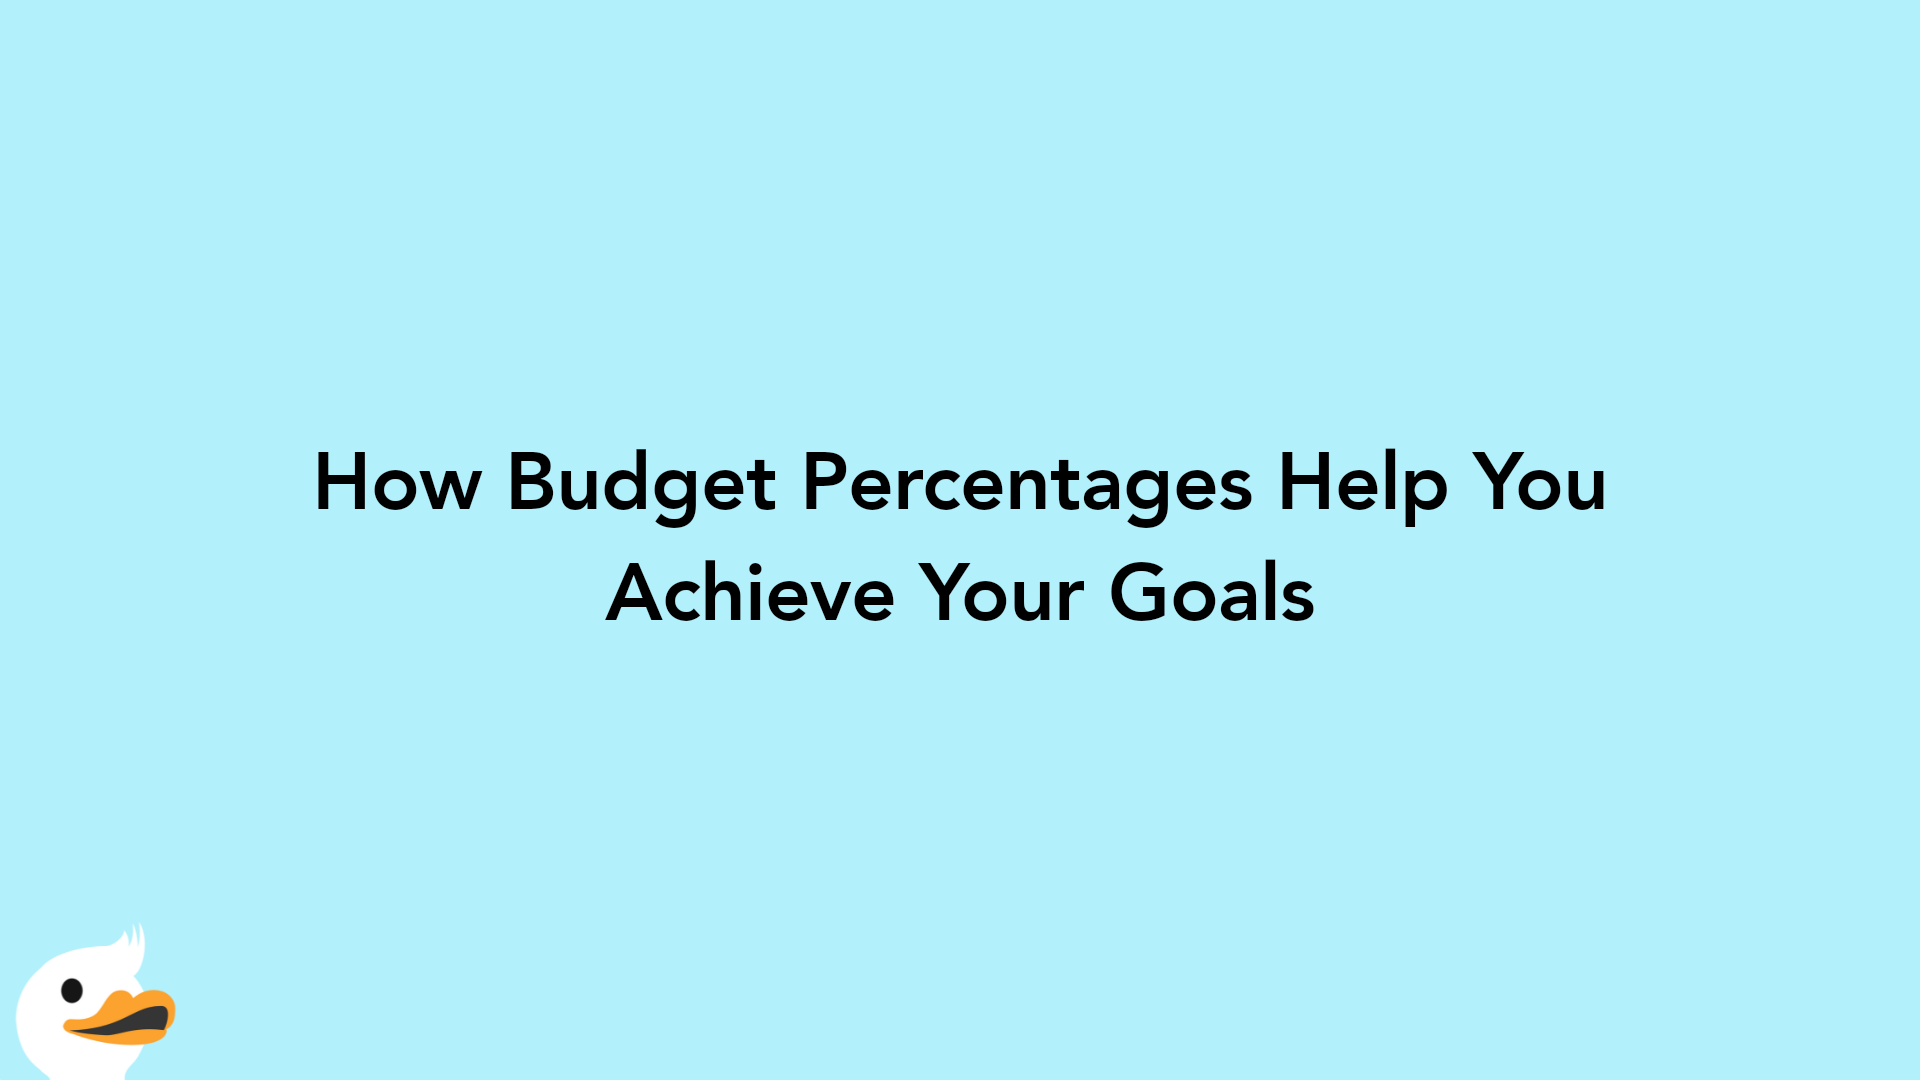 How Budget Percentages Help You Achieve Your Goals